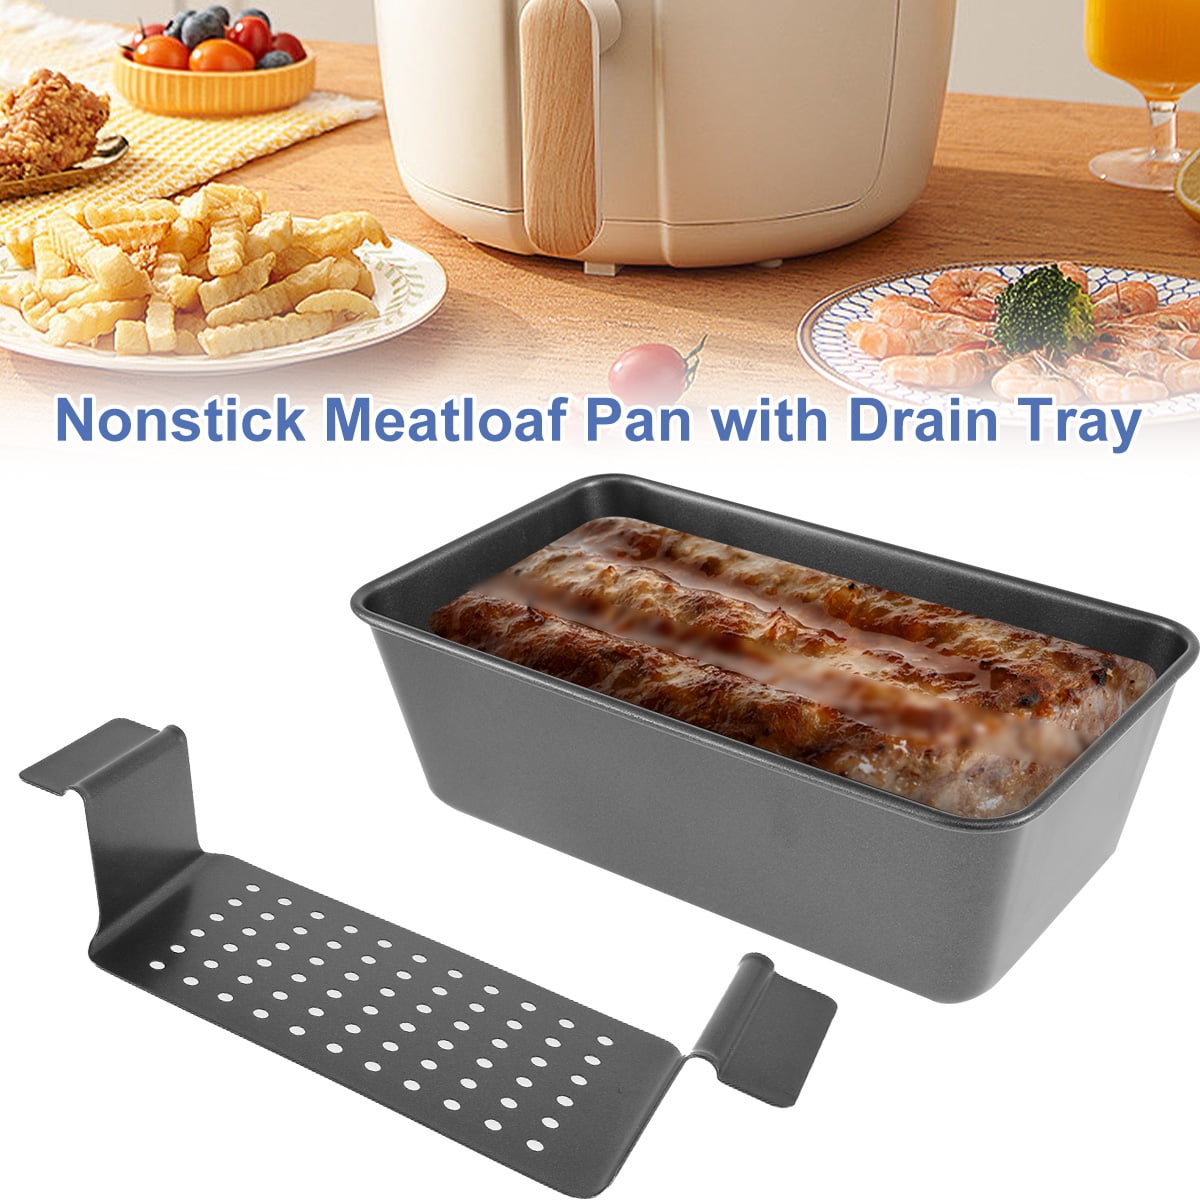 Lieonvis Meatloaf Pan with Drain Tray,12.2 x 5.7 Inches Loaf Pans with  Insert, Nonstick Meat Loaf for Baking,Reduce the Fat and Kick Up the Flavor